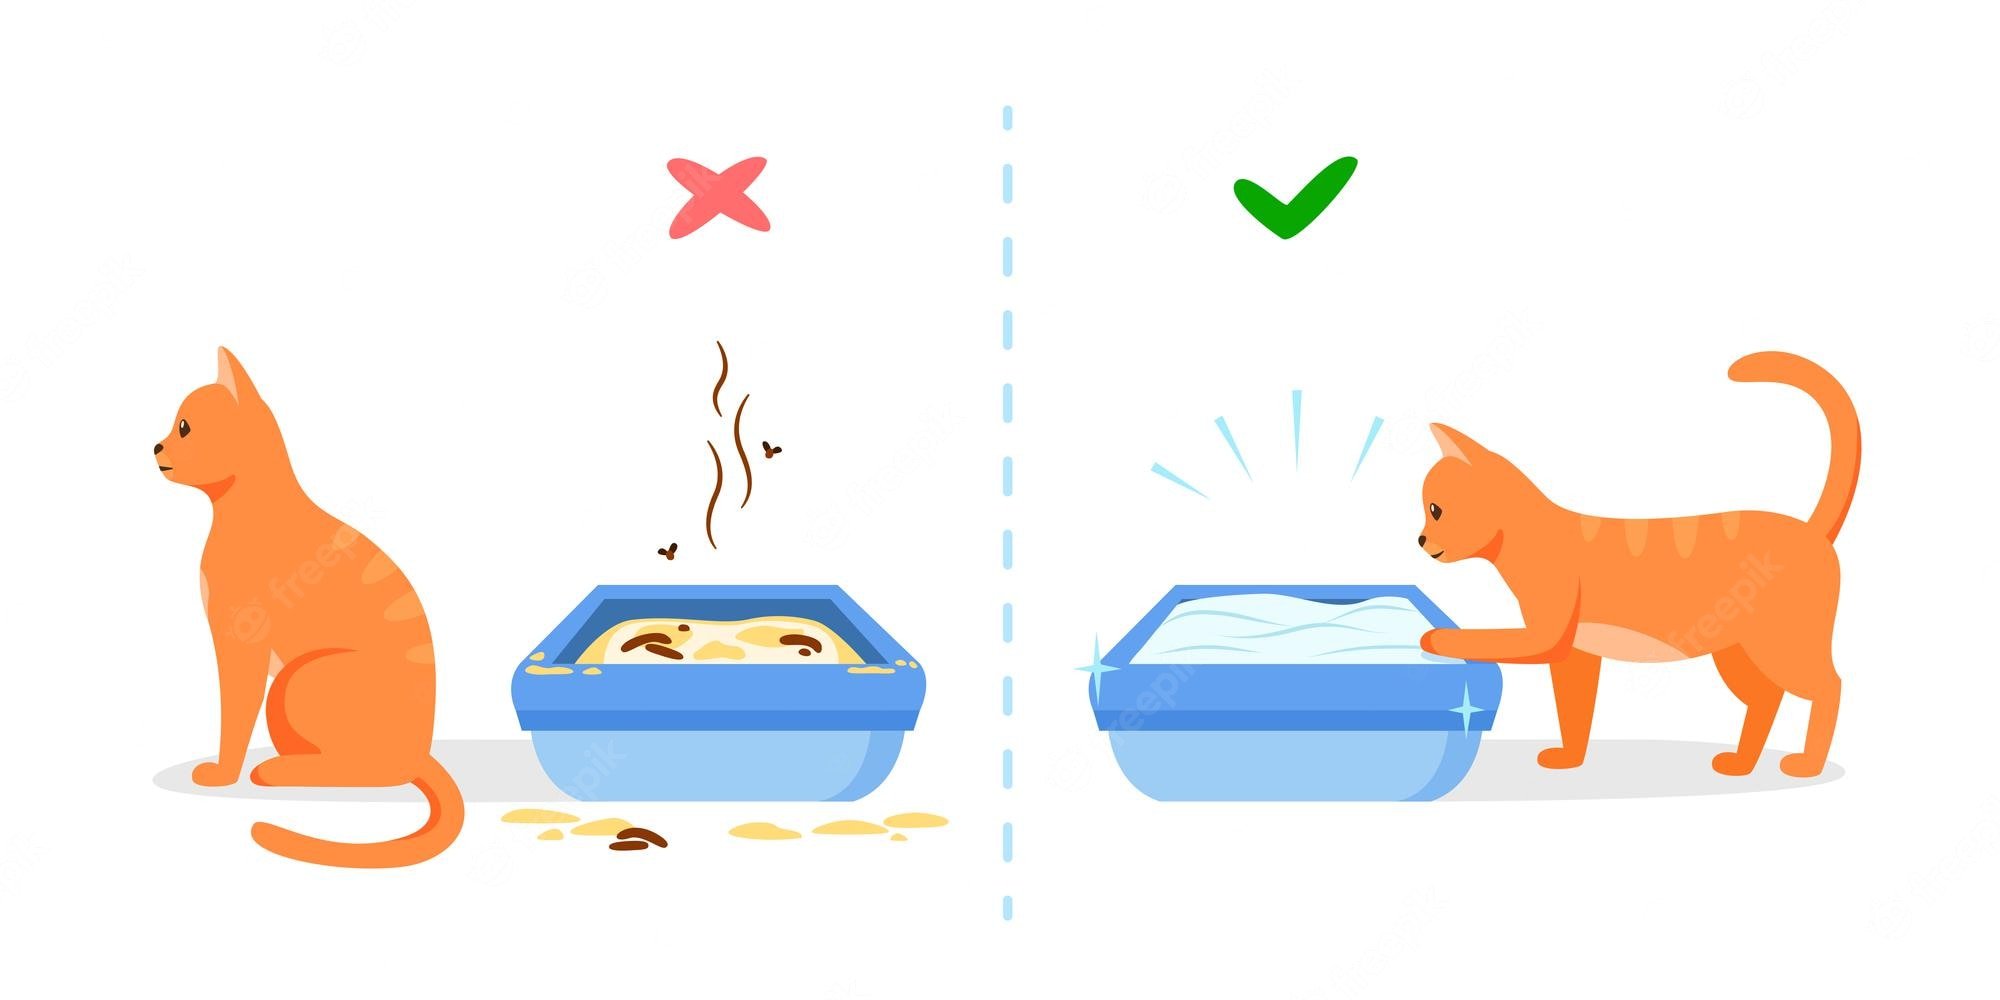 The left side has an orange cat next to a full litterbox that smells has a red X over it. The right side has a cat going into a clean litterbox with a green check mark over it.